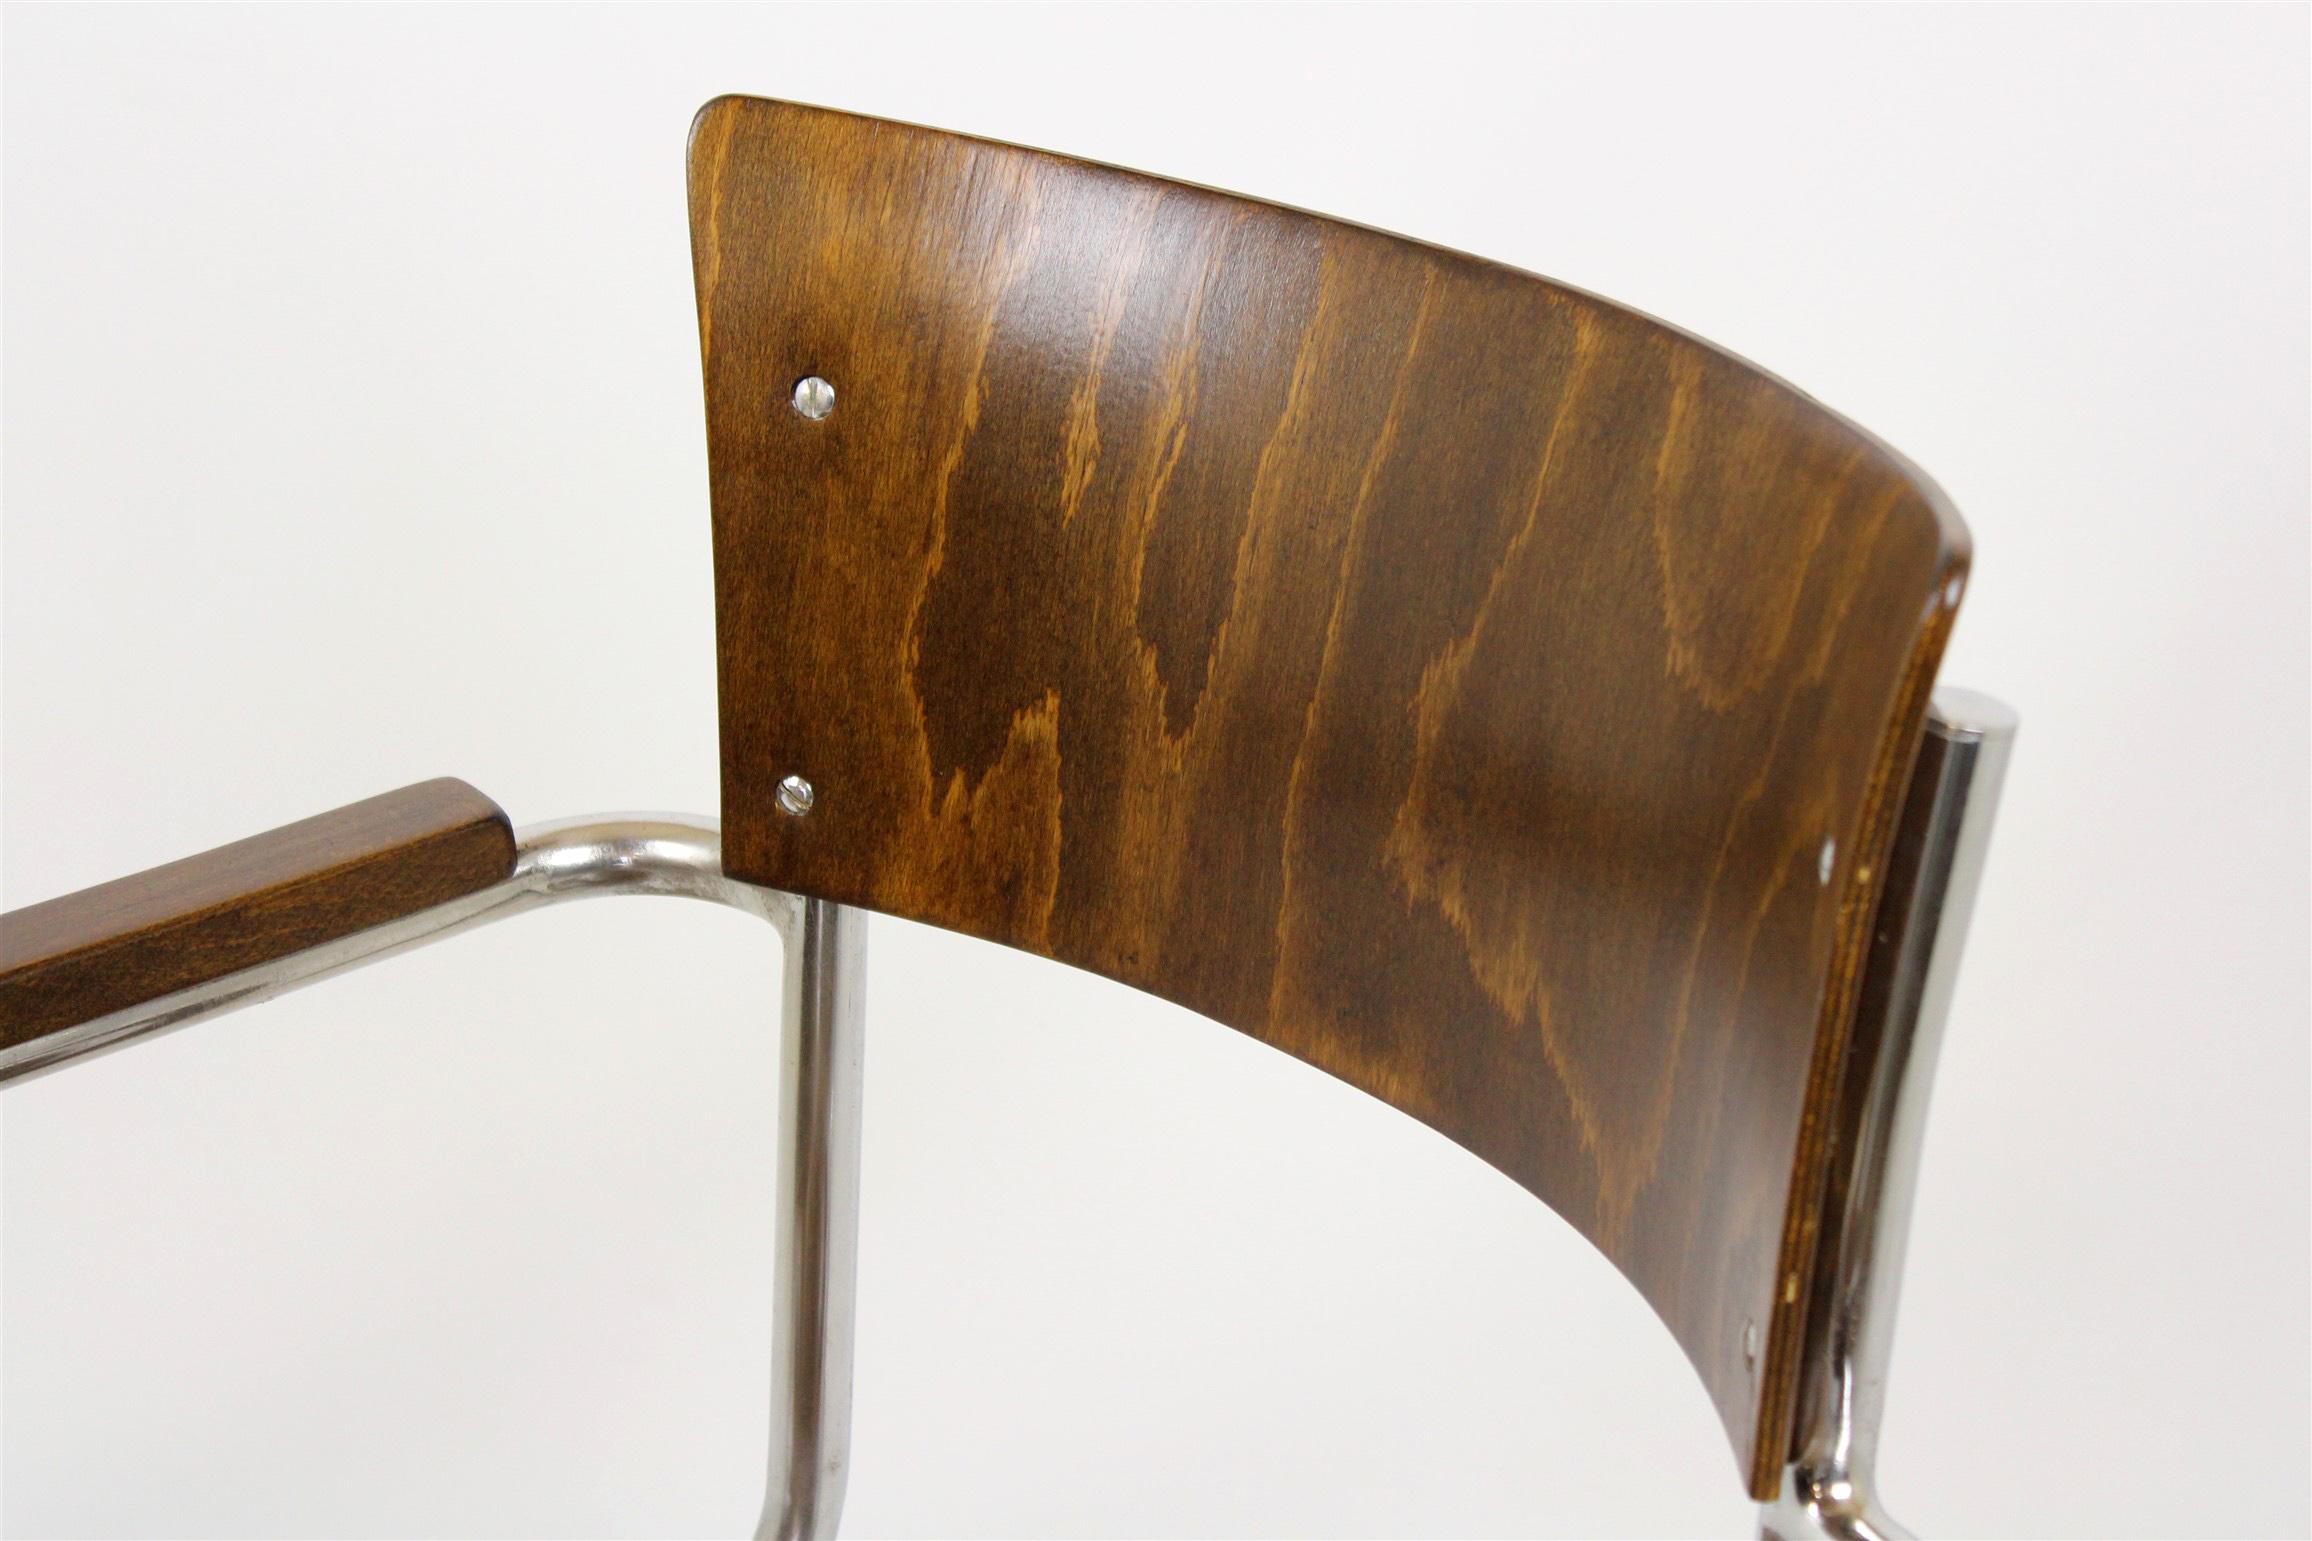 Fn 6 Cantilever Chair by Mart Stam for Mücke-Melder, 1930s For Sale 4